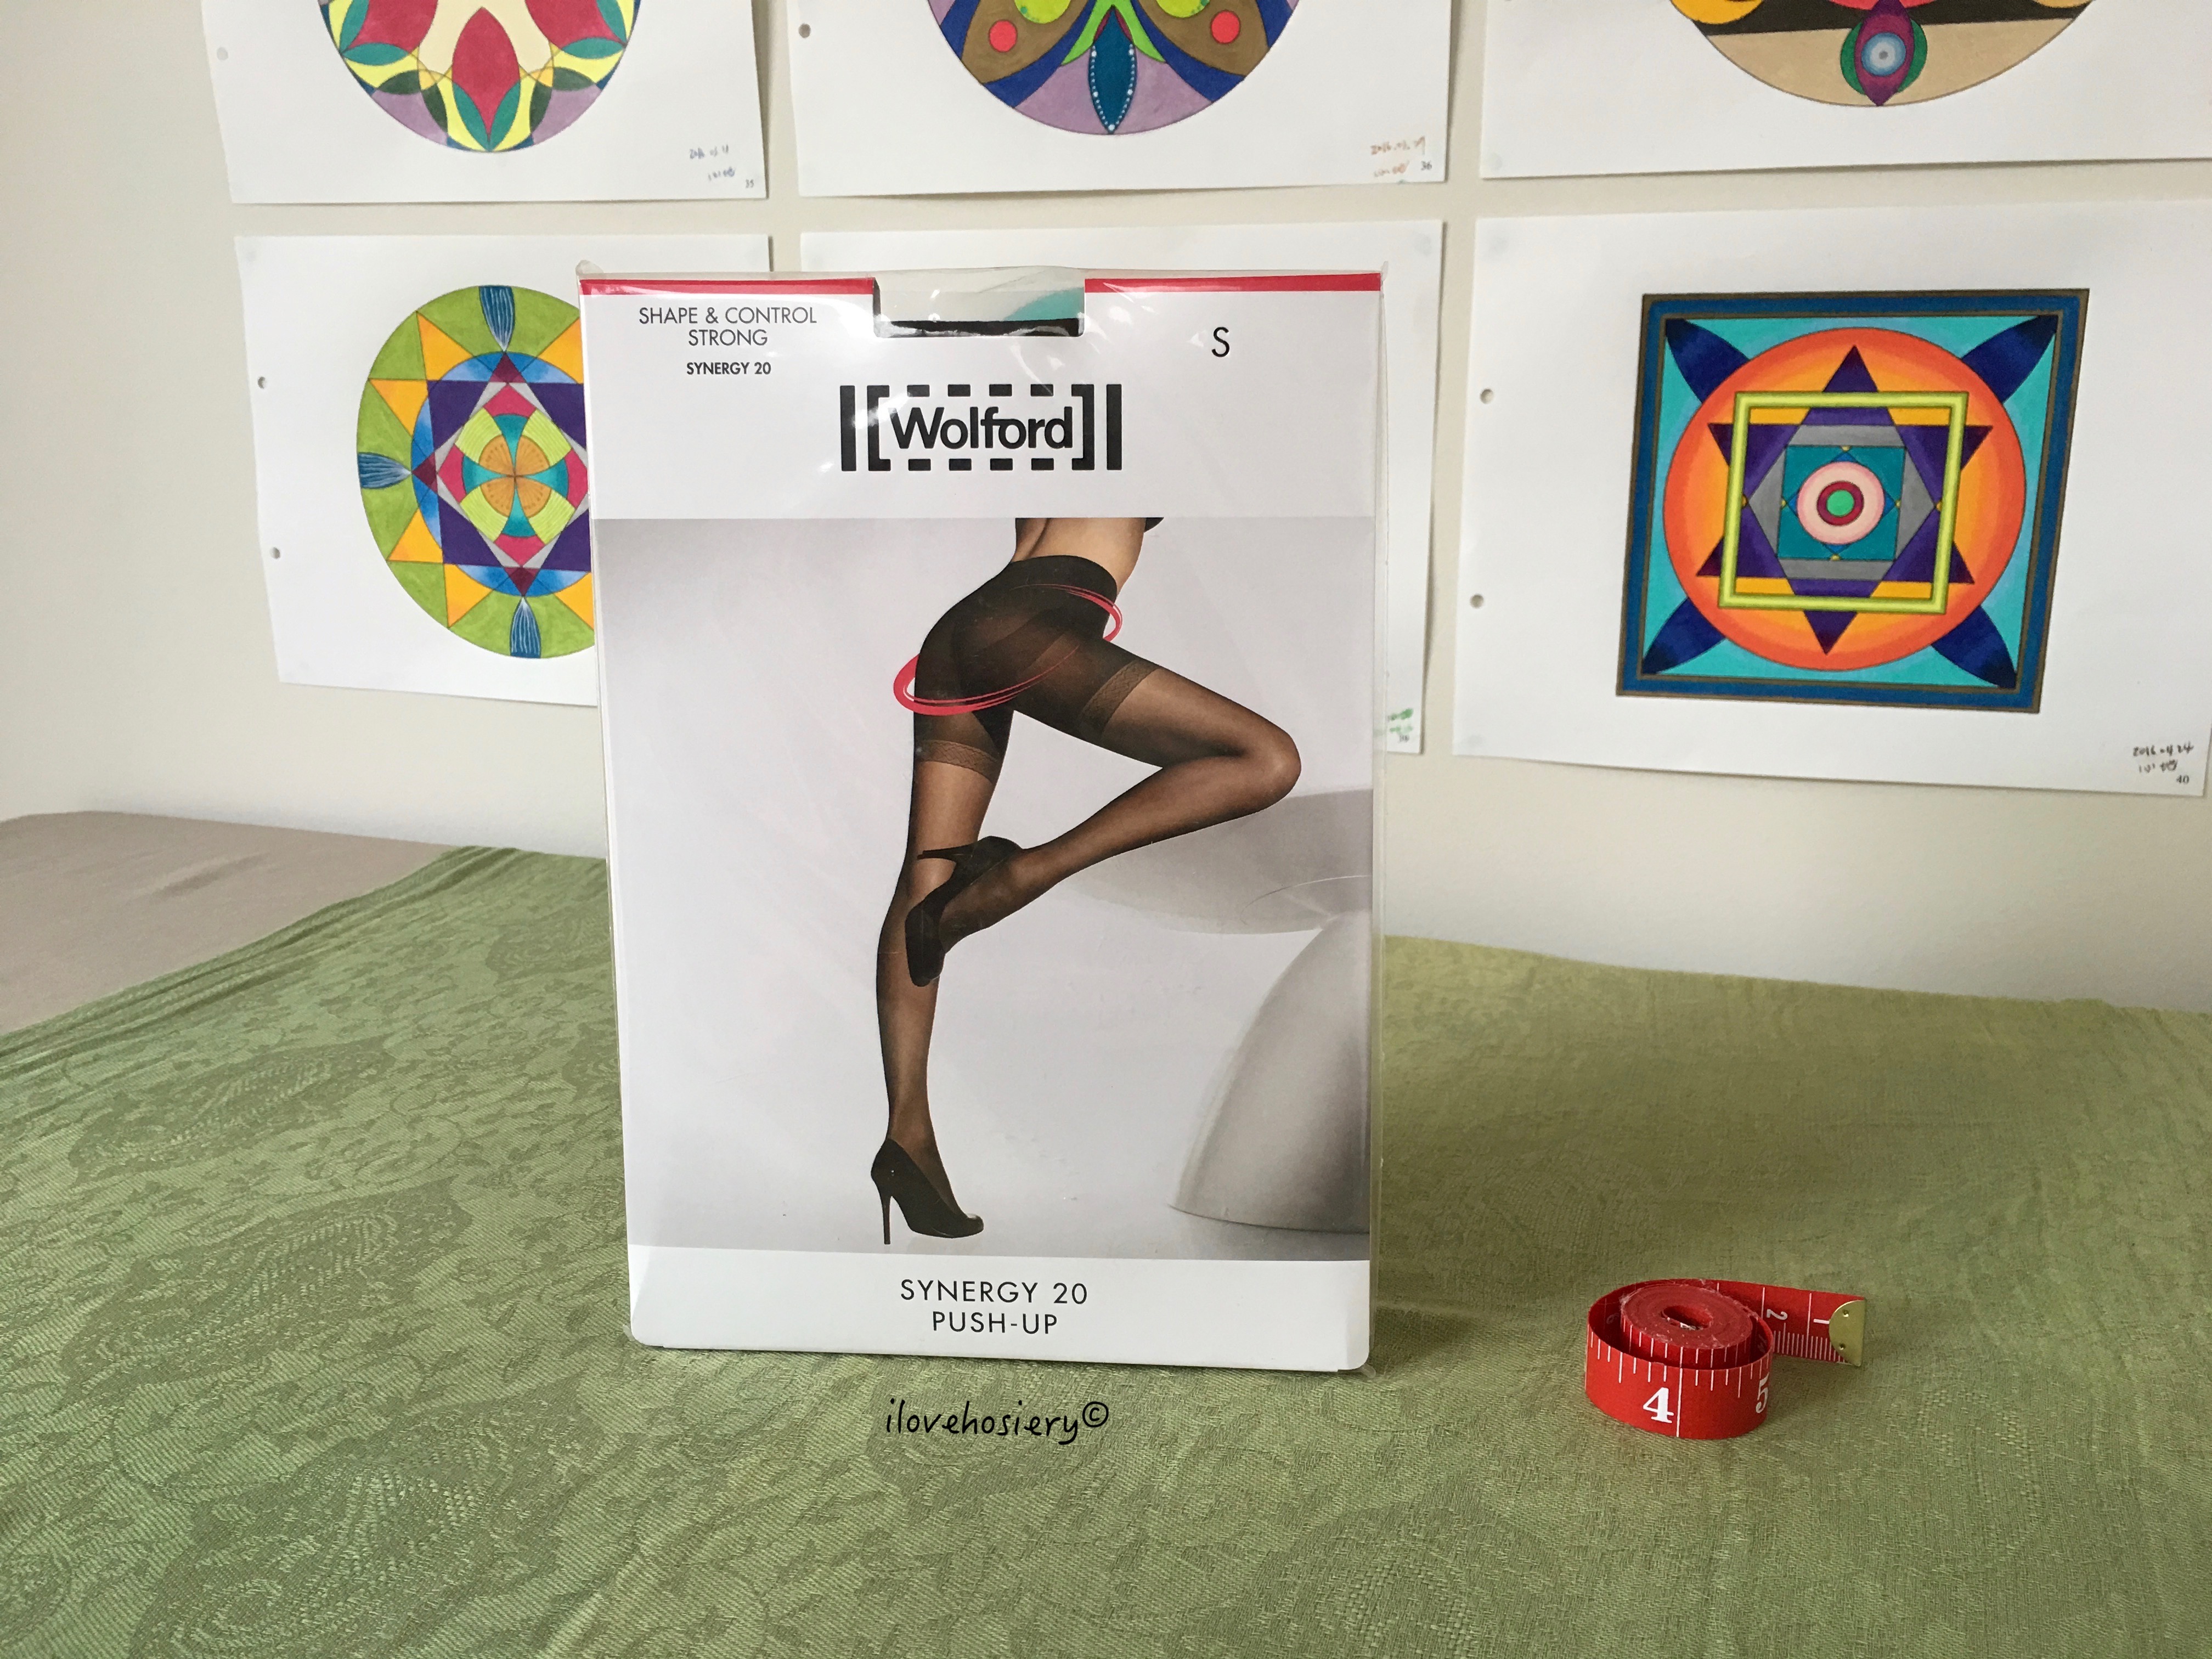 Synergy 20 Push-Up Tights